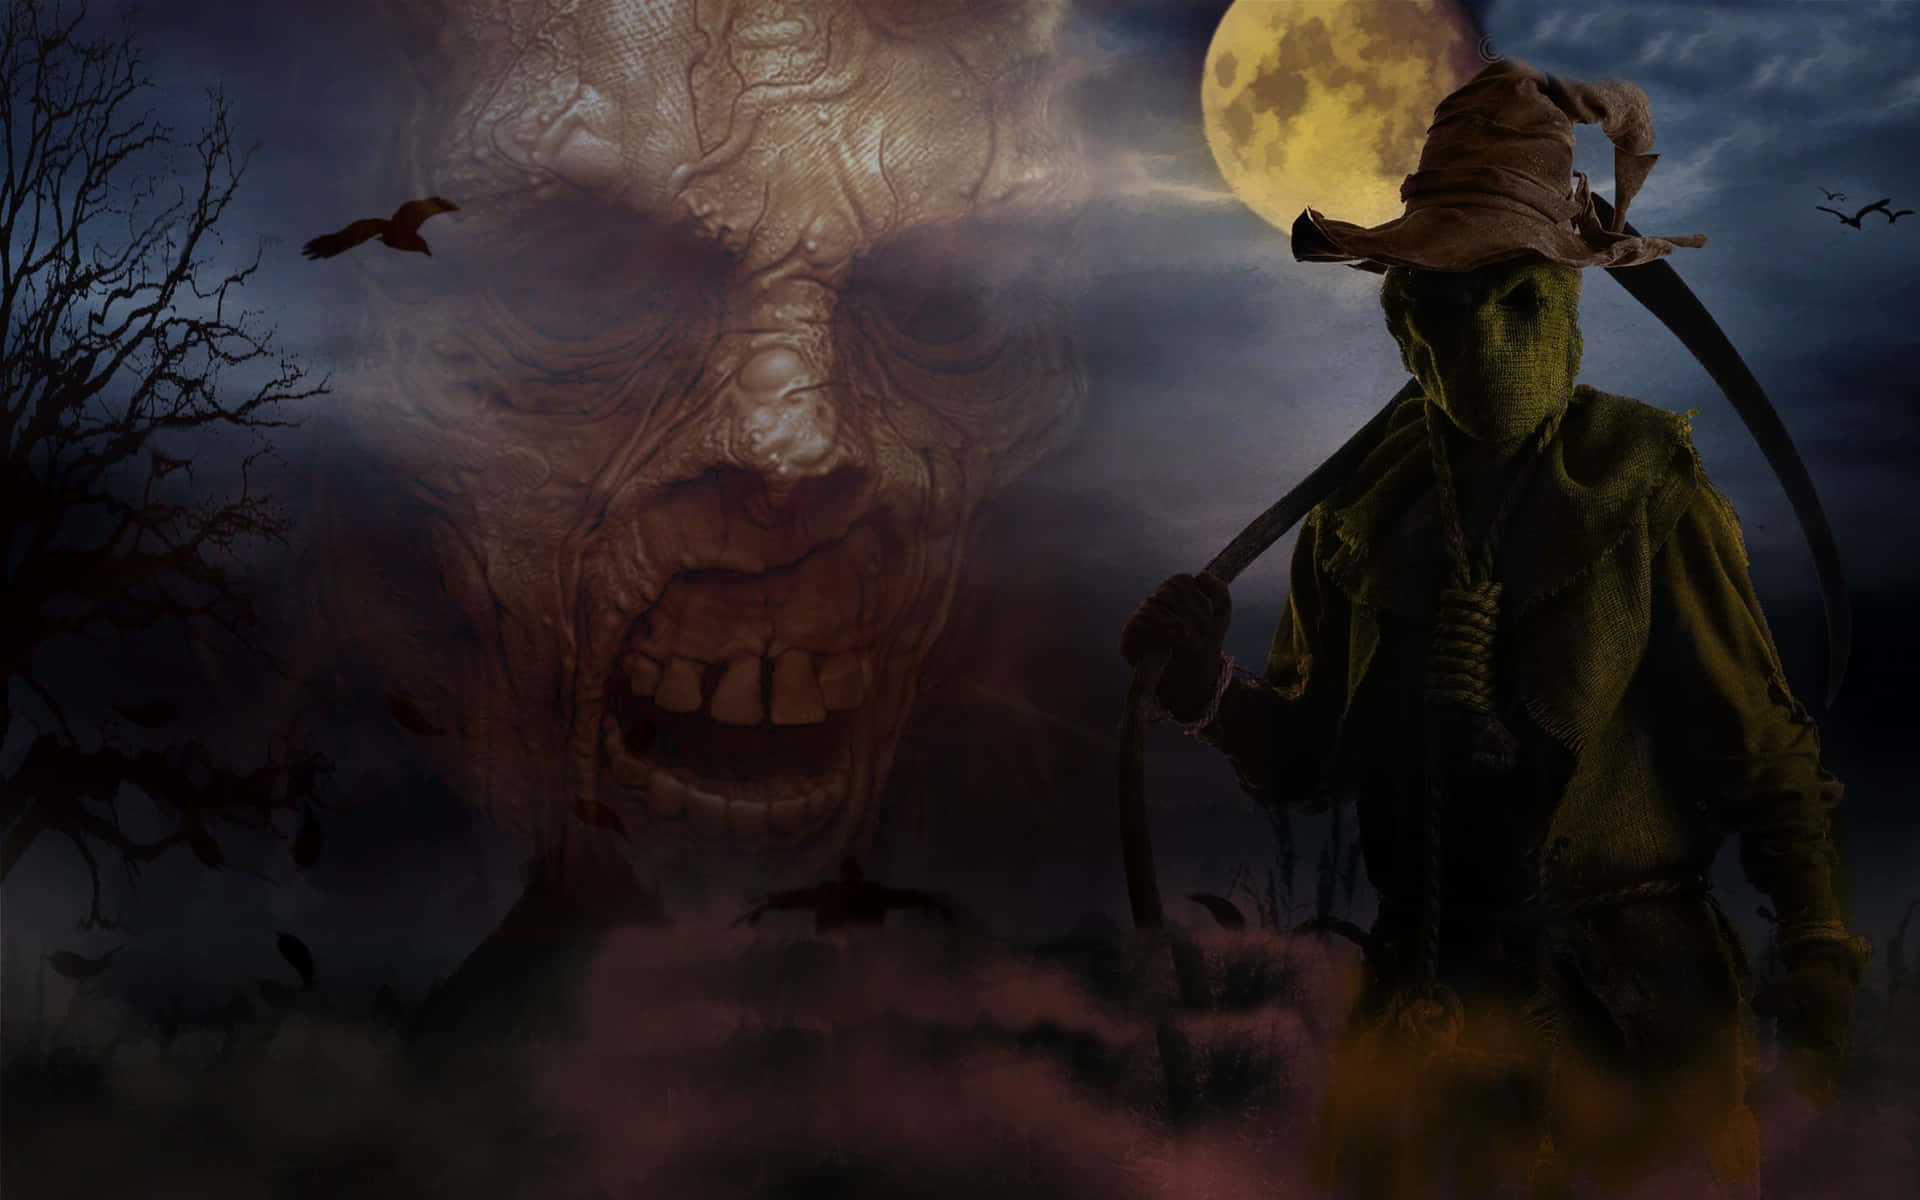 Get ready for a spooky night of thrills and chills with animated Halloween! Wallpaper